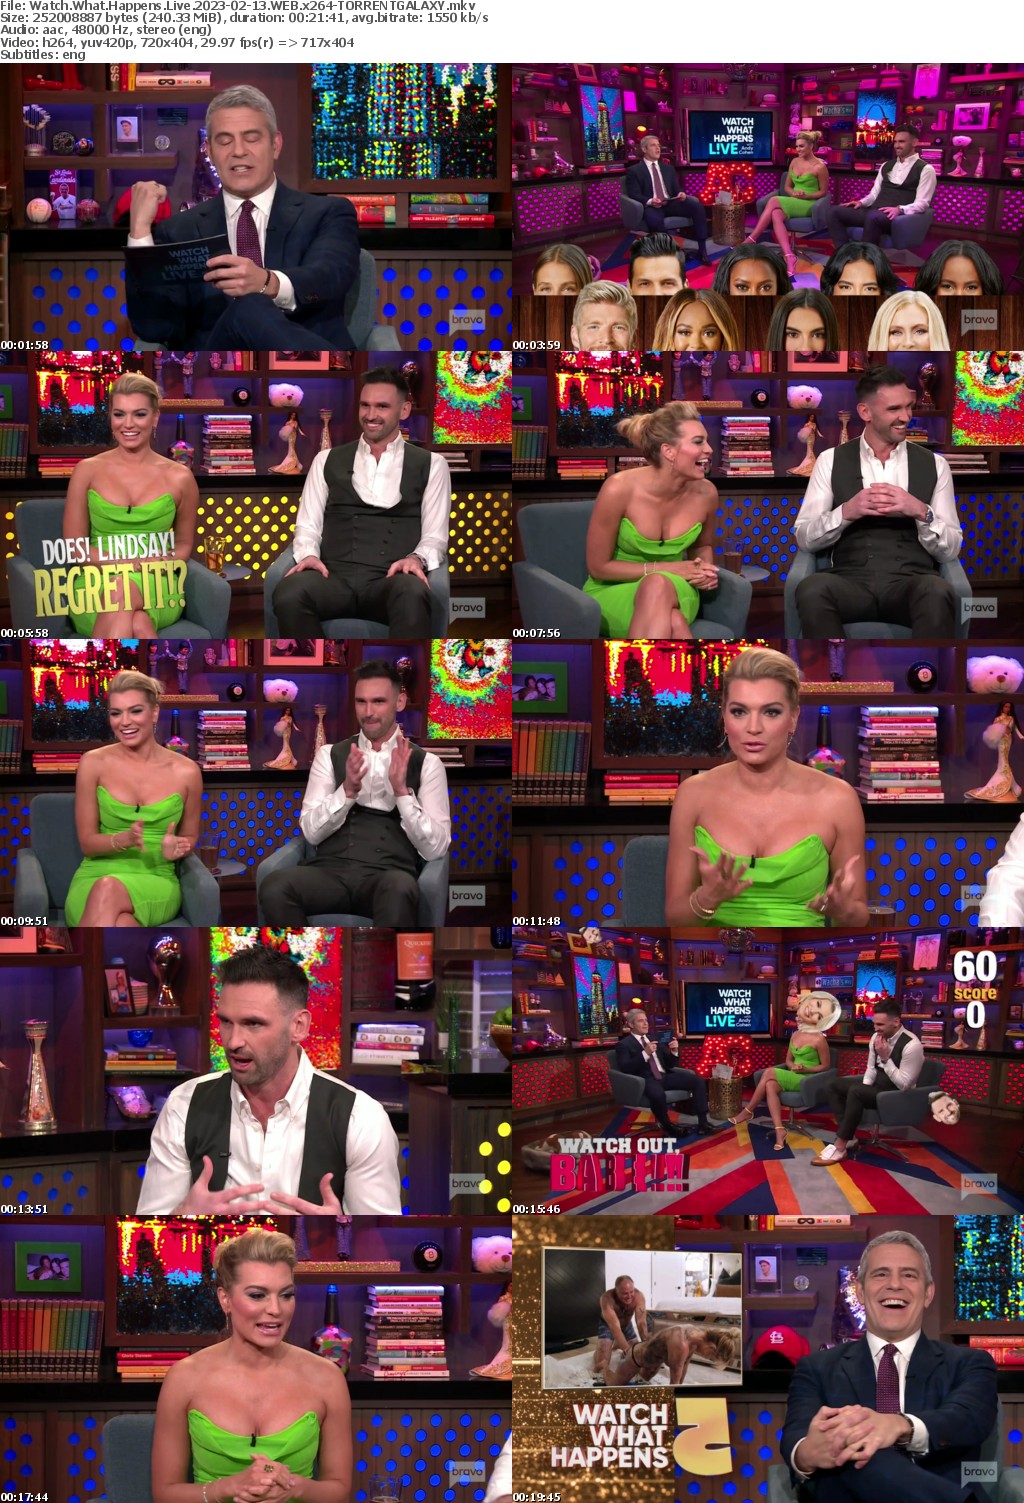 Watch What Happens Live 2023-02-13 WEB x264-GALAXY